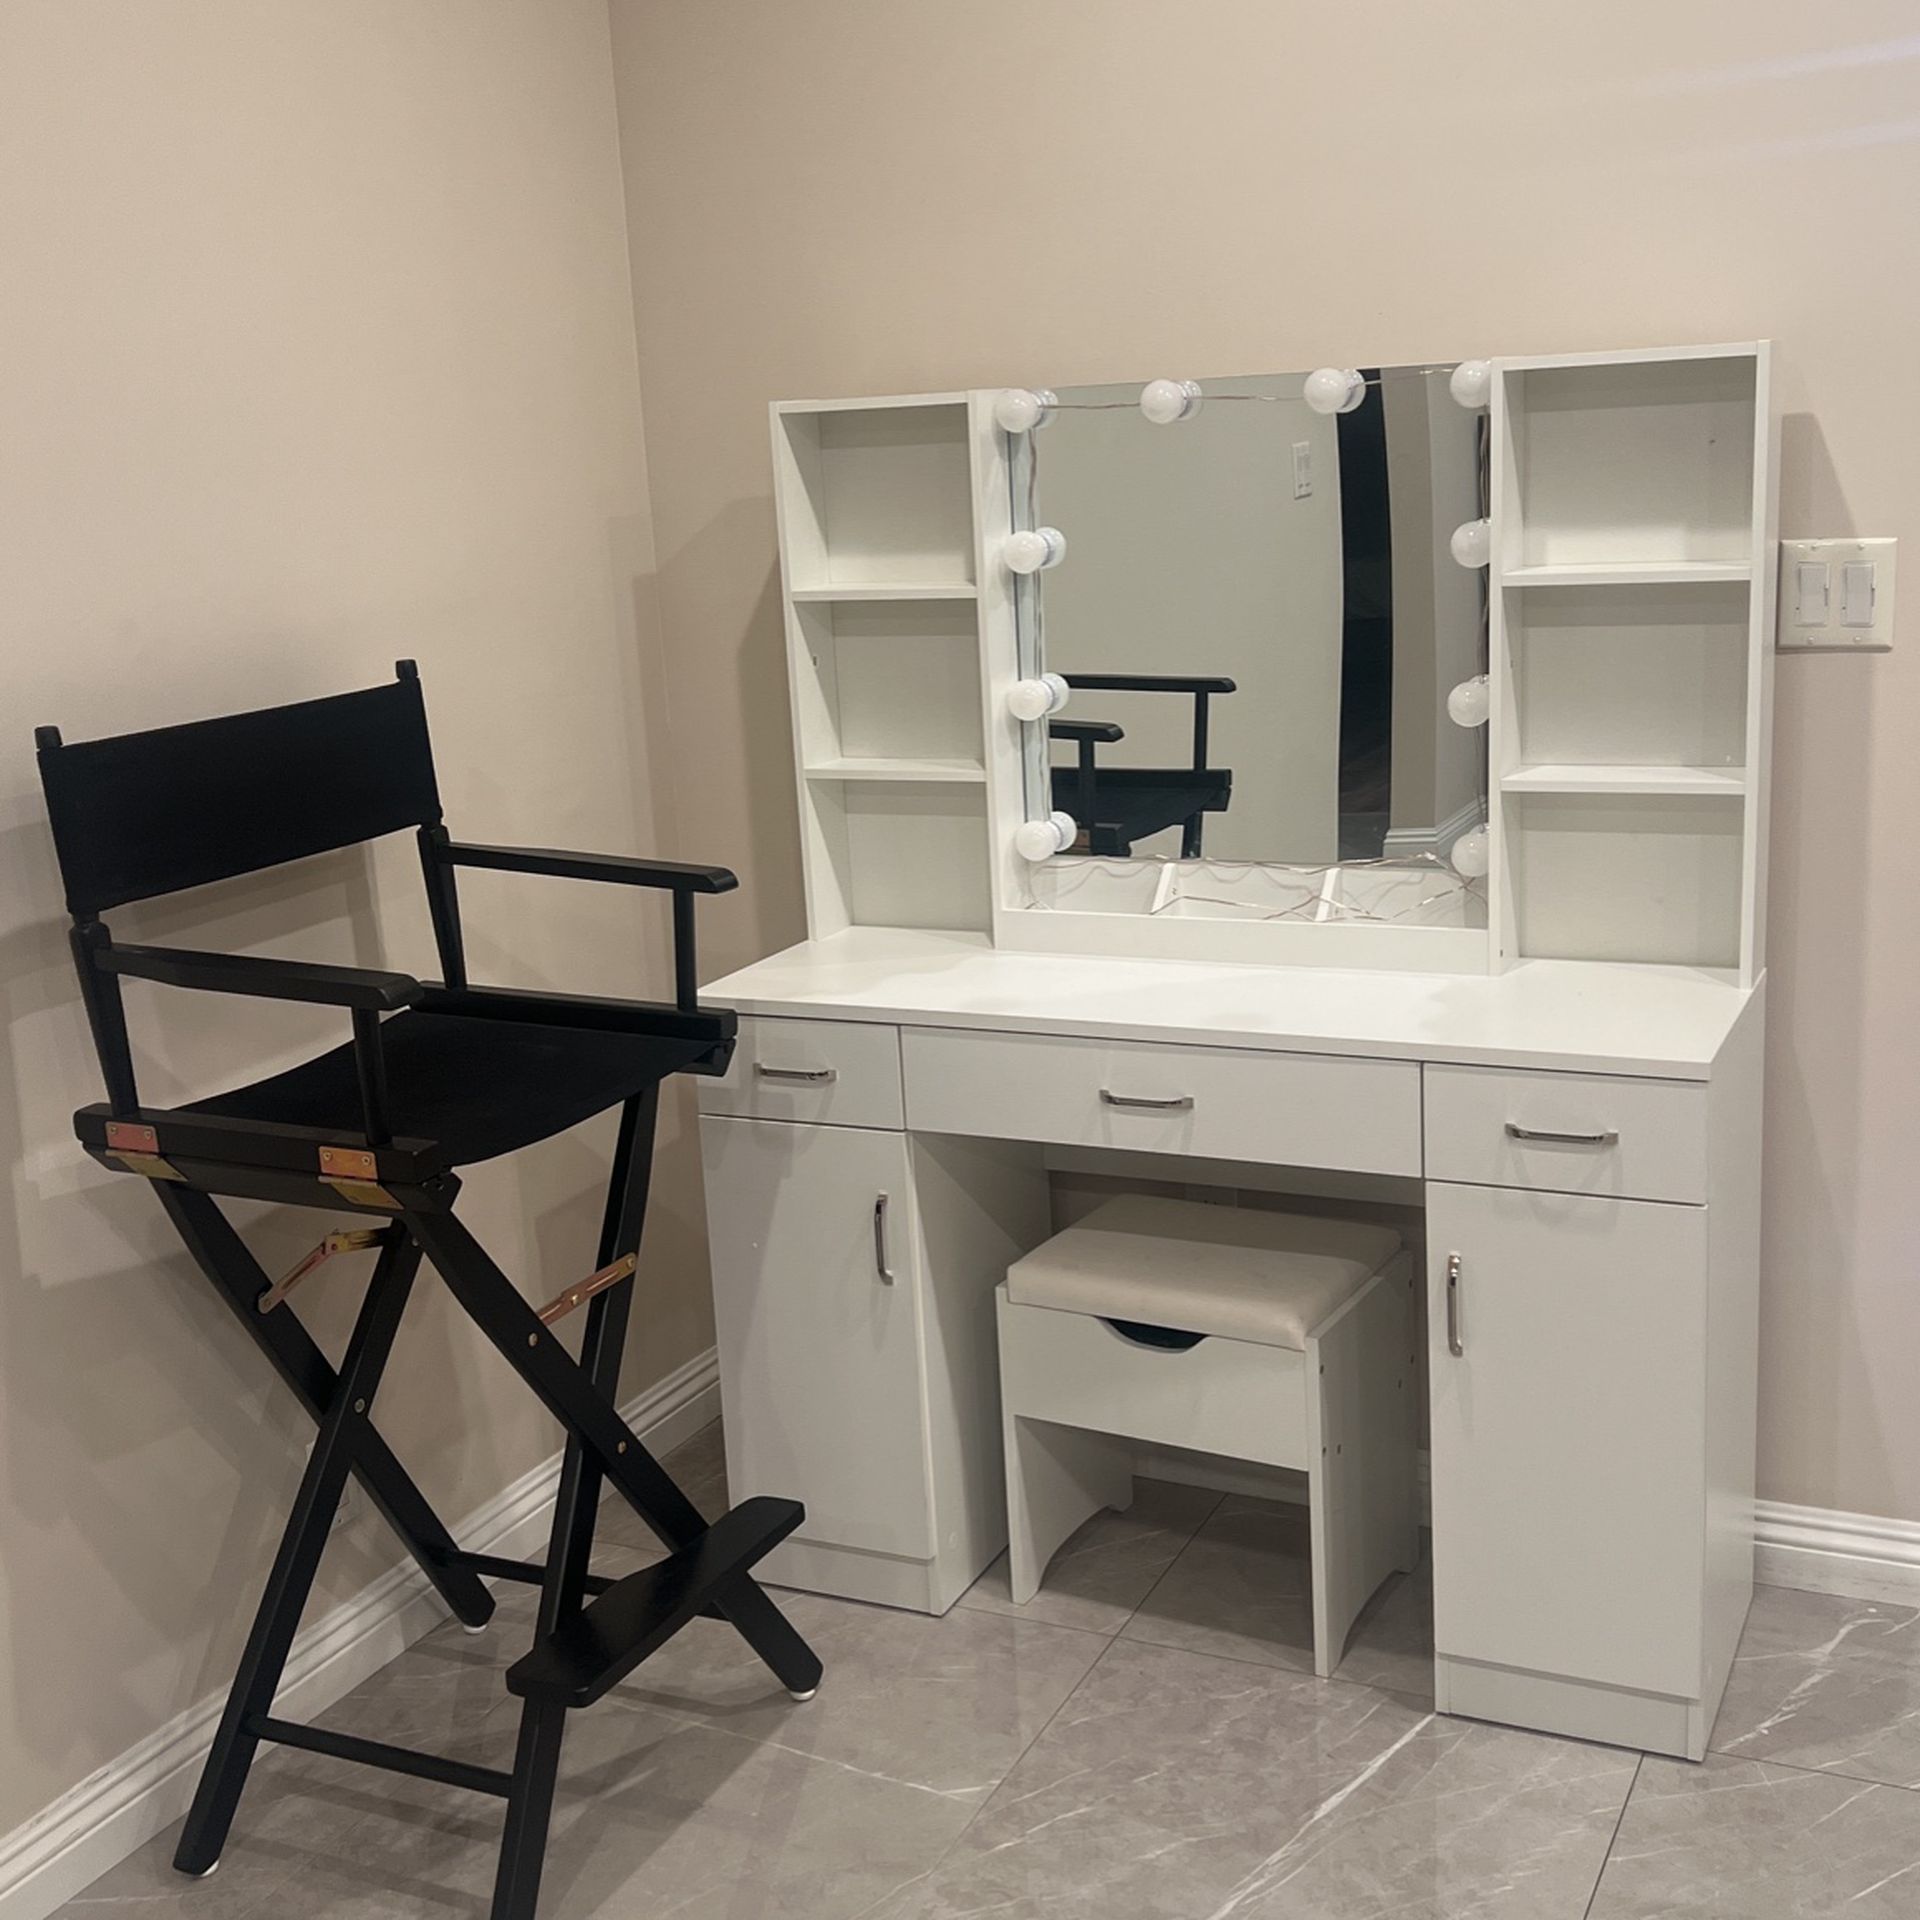 Make up desk with chair